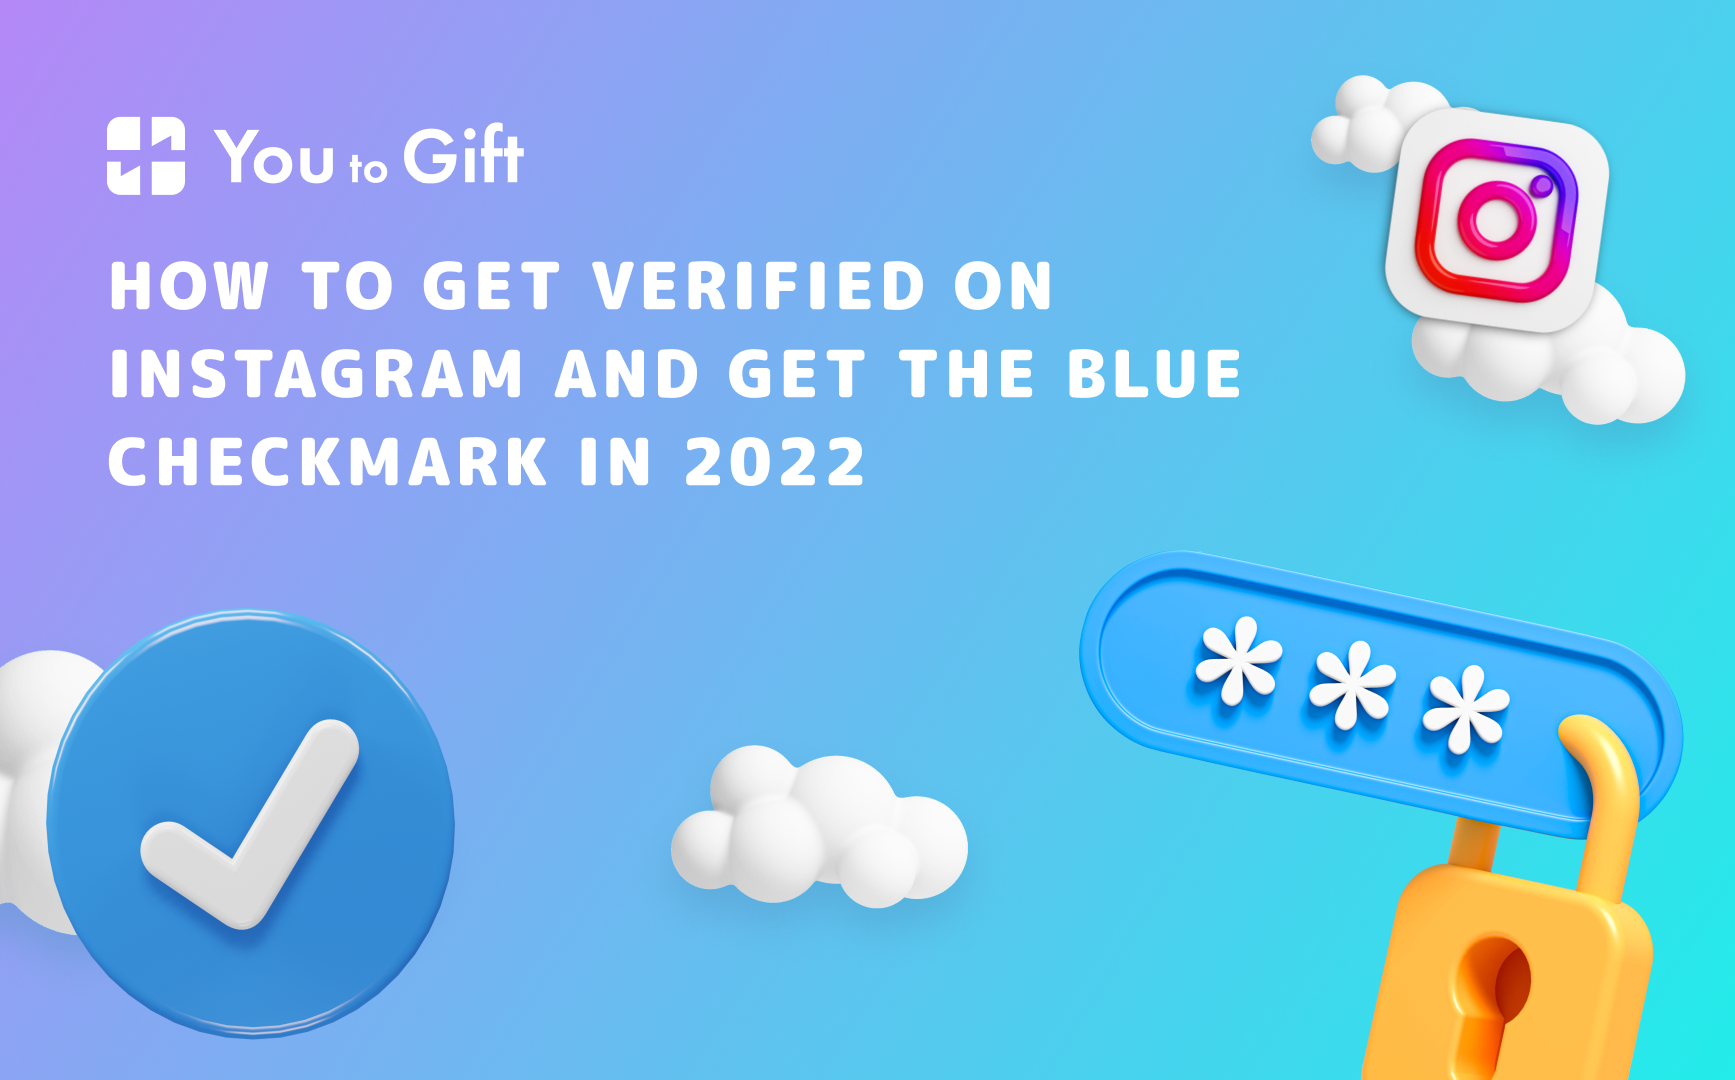 How to Get Verified on Instagram and Get the Blue Checkmark in 2022